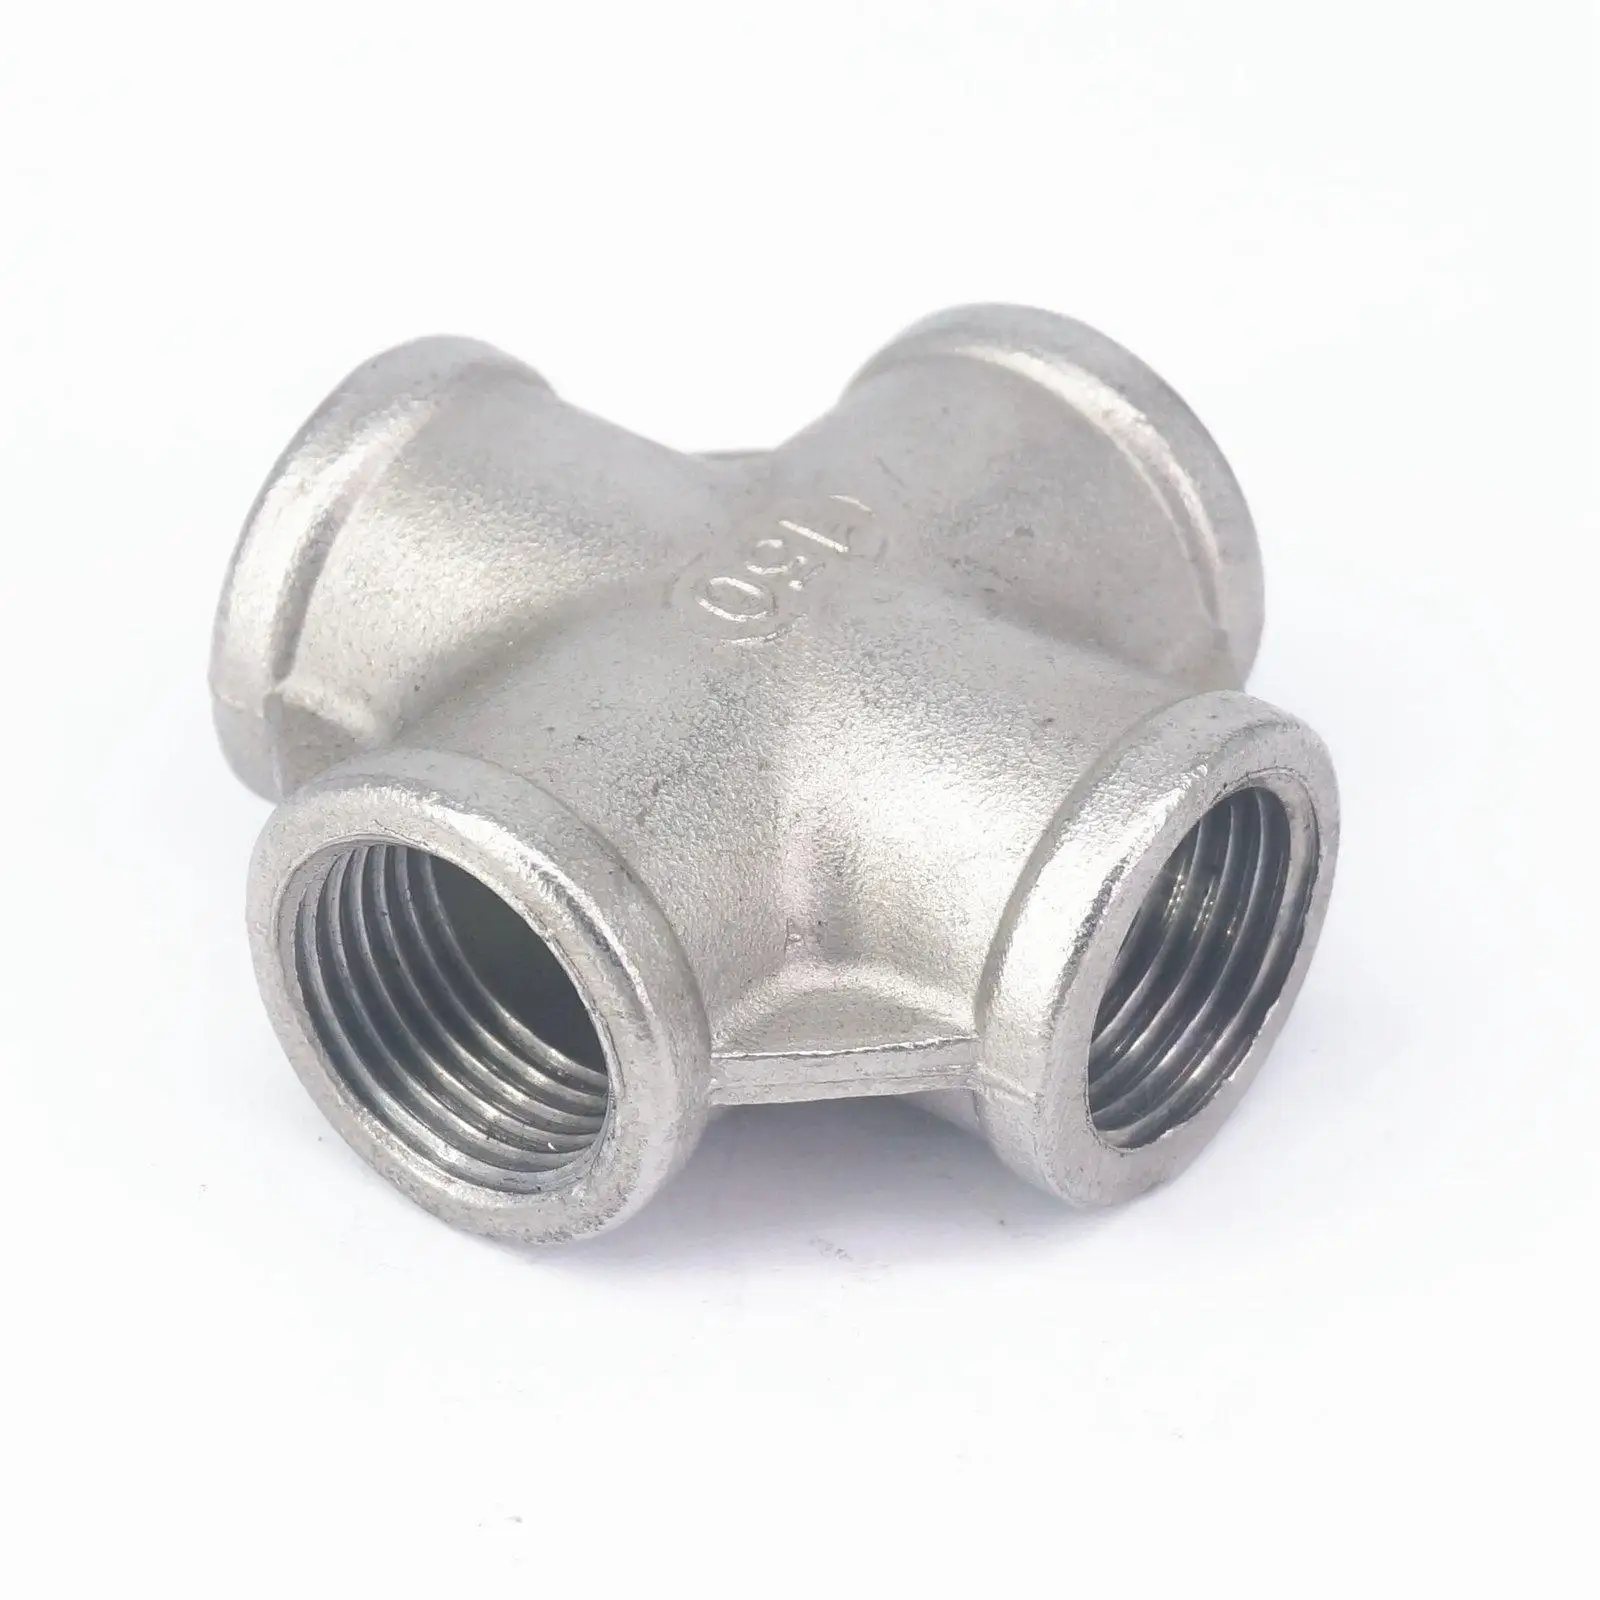 1/2" BSP Female 304 SS Cross 4 Way Connector Pipe Fitting water